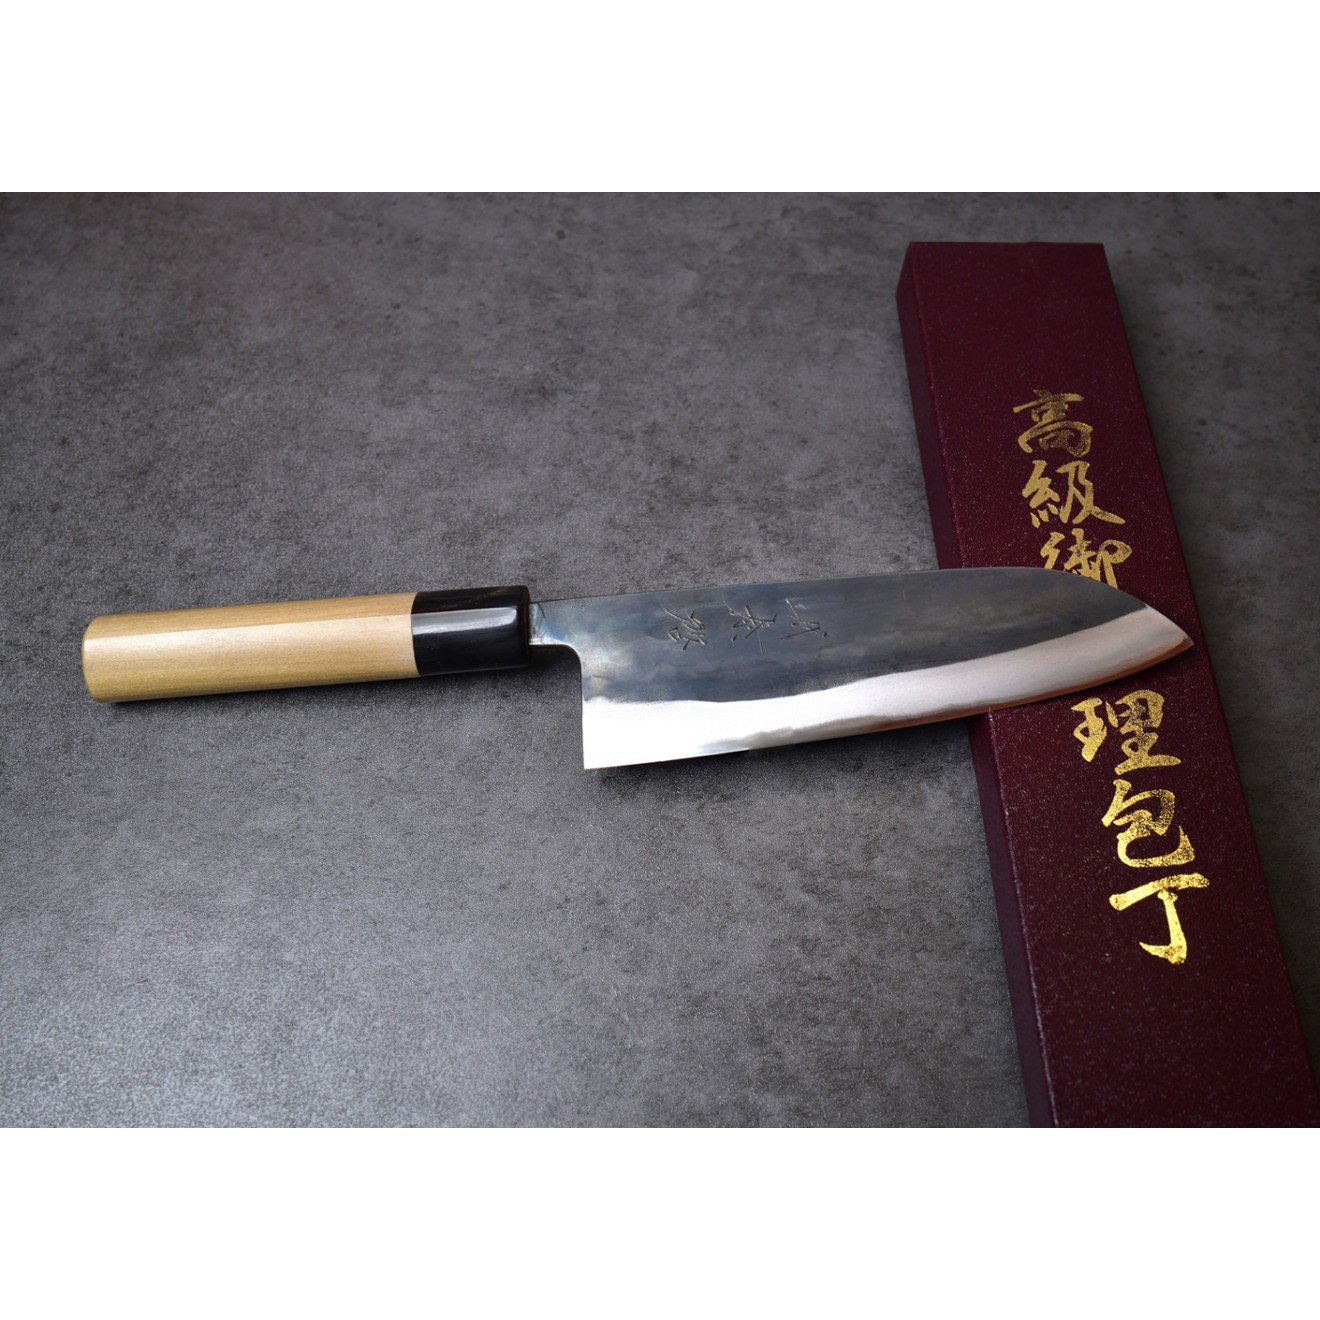 Santoku Japanese utility knife made from Aogami steel